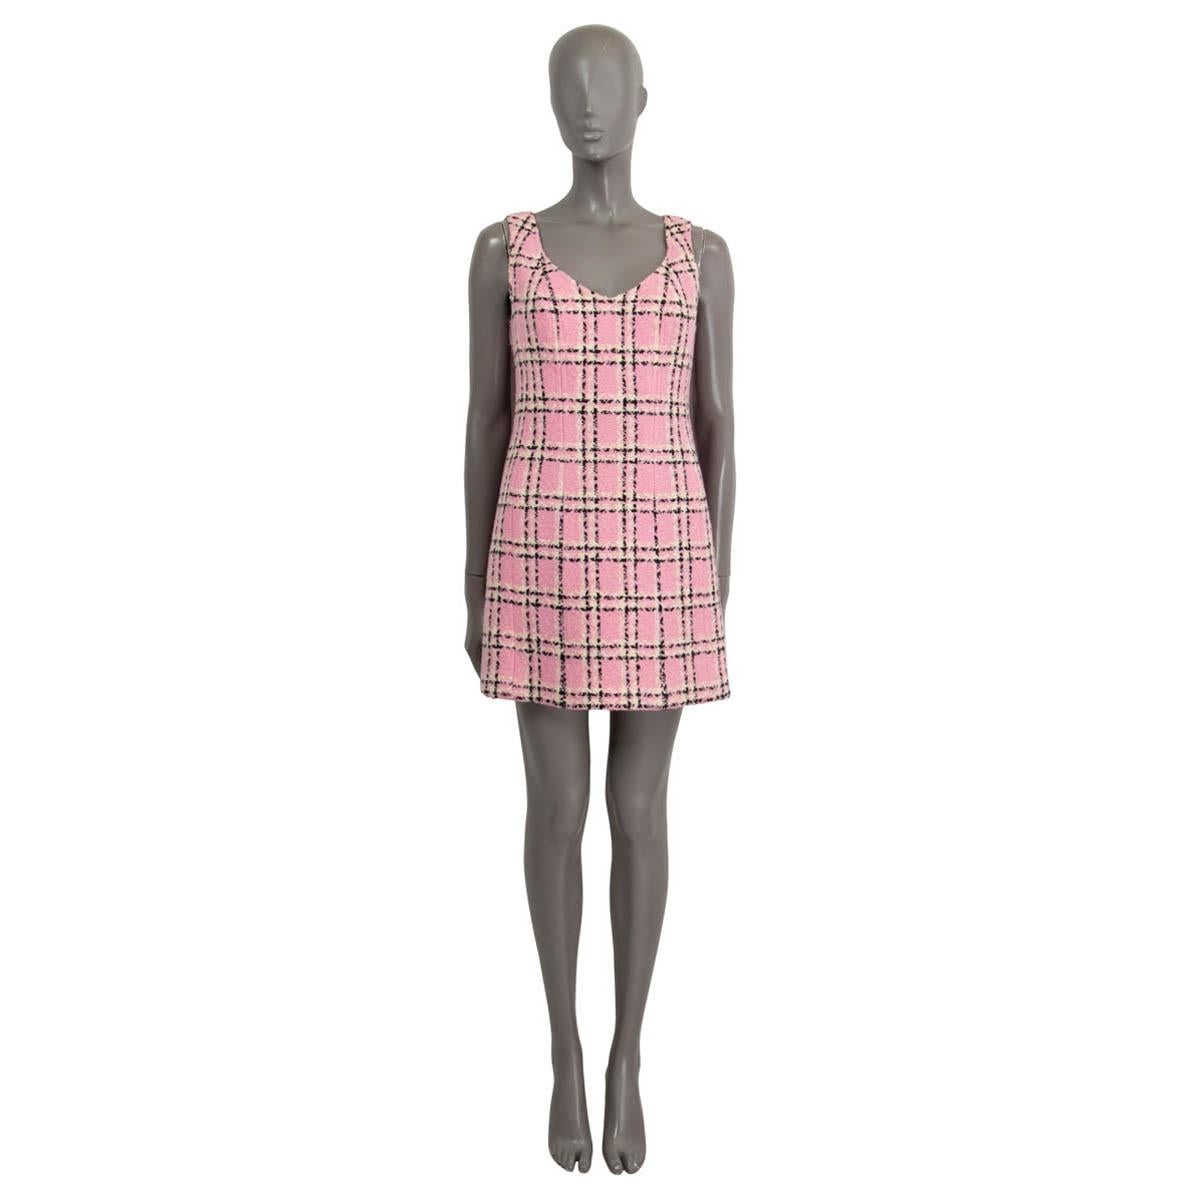 100% authentic Chanel sleeveless tweed mini dress in pink, black and off-white wool (assumed cause tag is missing). Opens with a zipper and a hook on the back. Lined in pink silk (assumed cause tag is missing). Shows deodorant stains on the outside